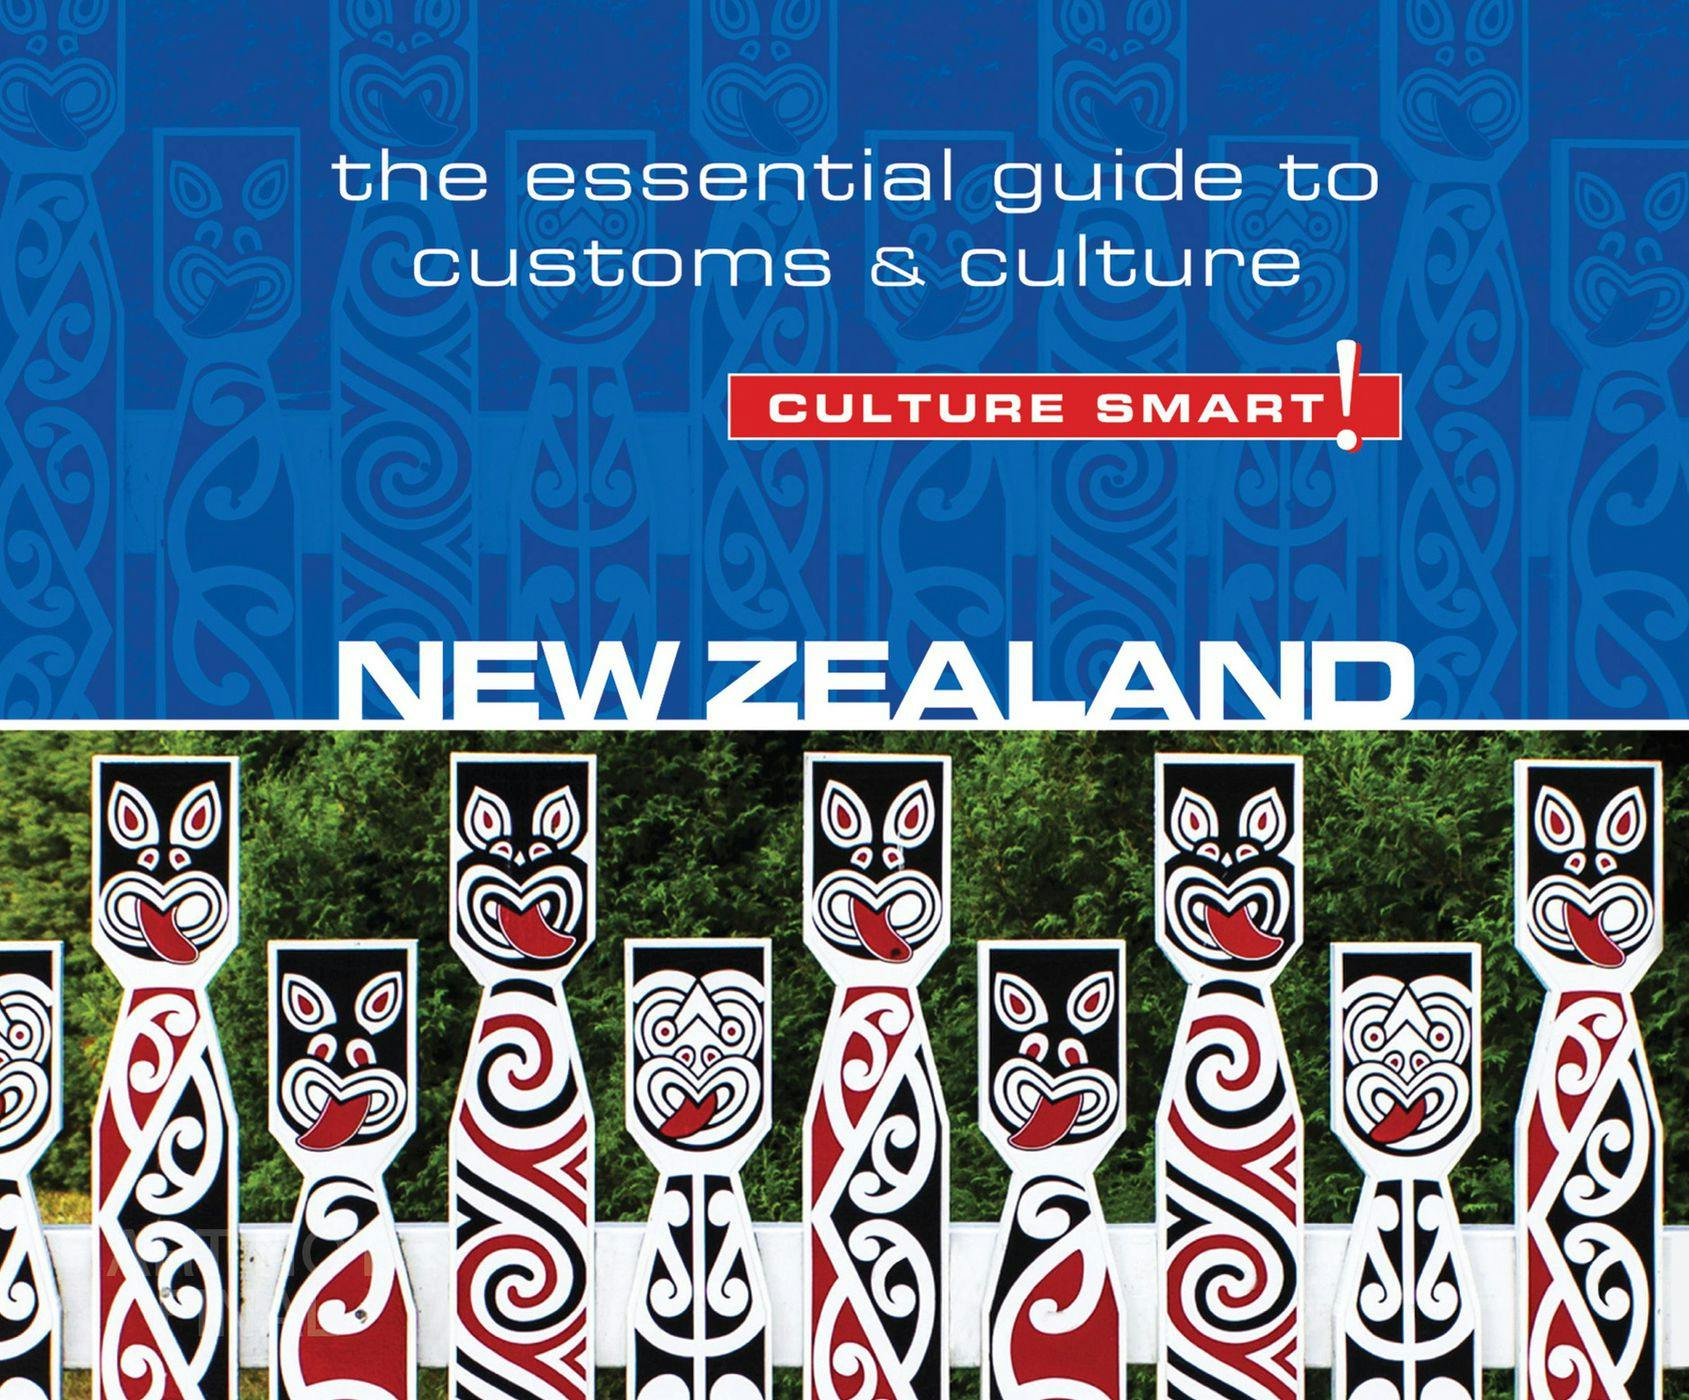 New Zealand - Culture Smart! - The Essential Guide to Customs & Culture (Unabridged) - undefined